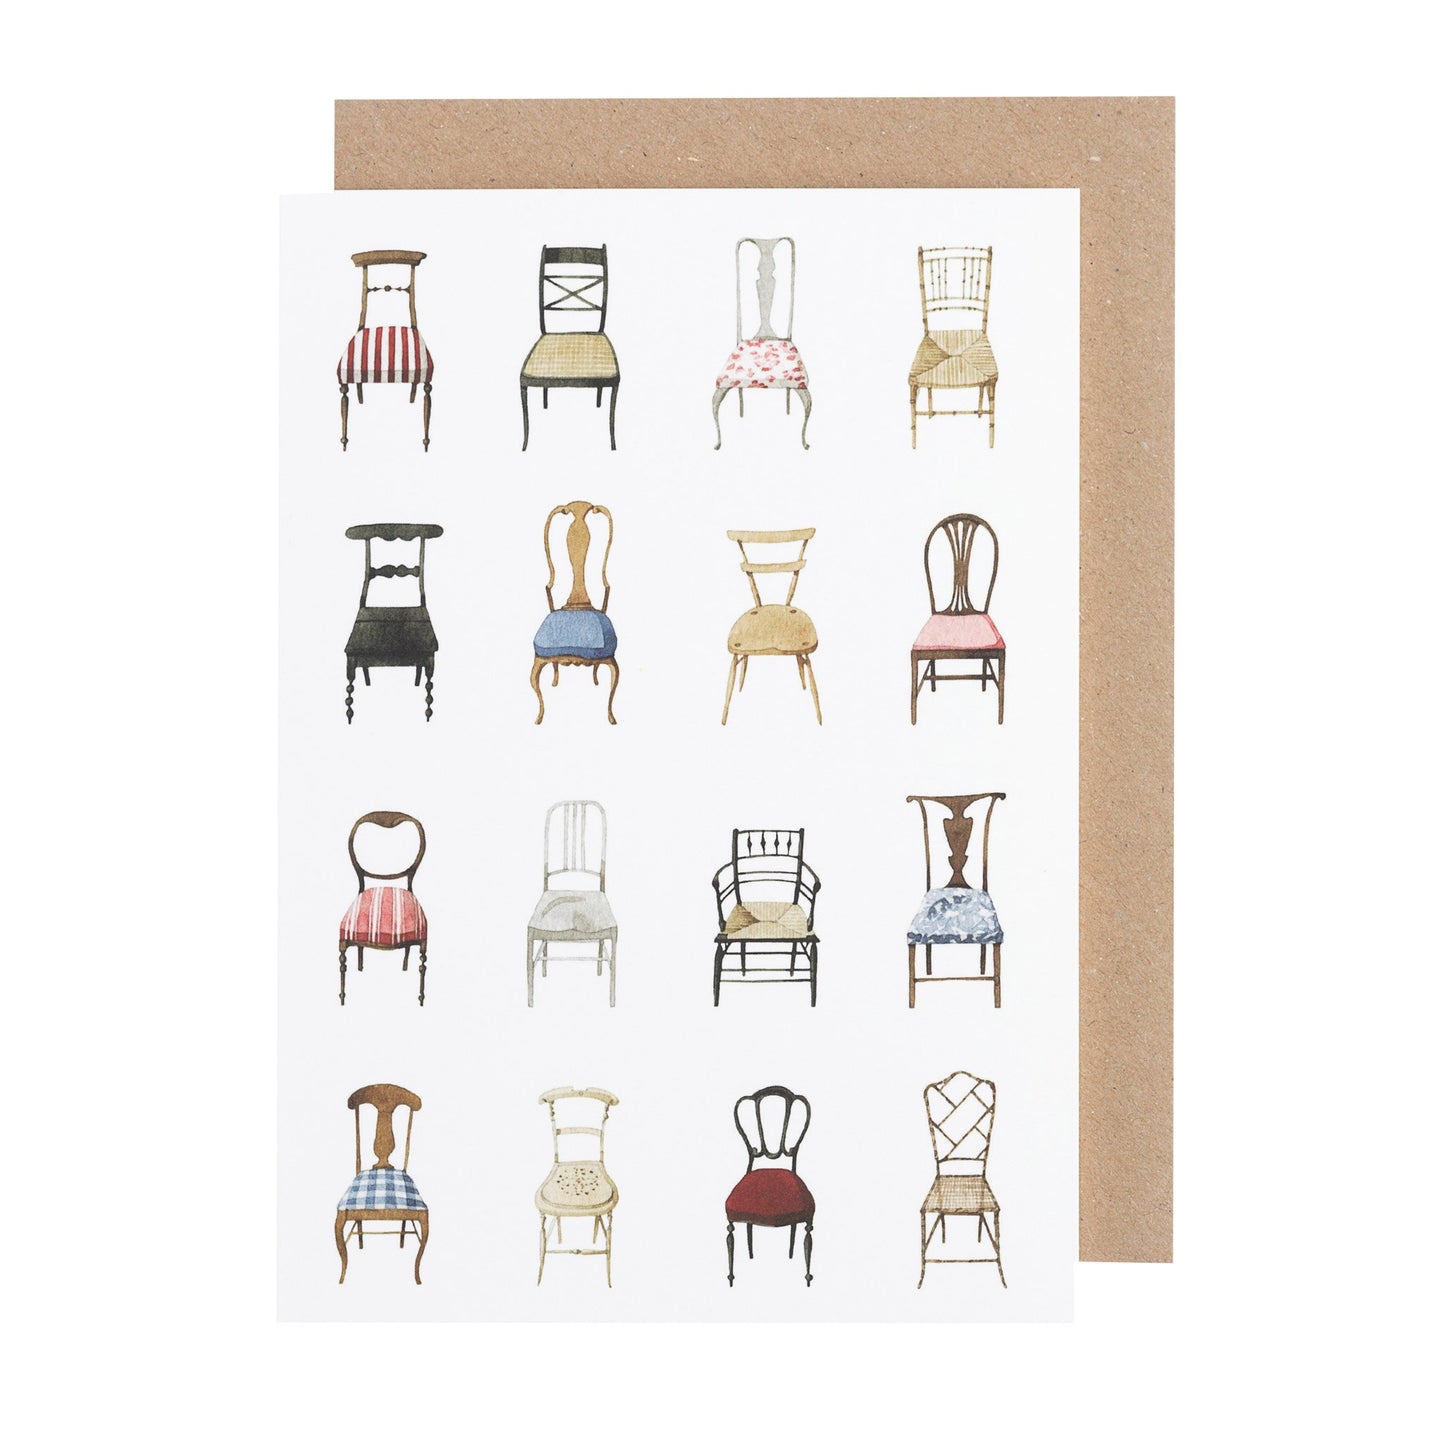 environmentally sustainable paper, compostable packaging, recycled paper, made in england, illustration, chairs, musical chairs